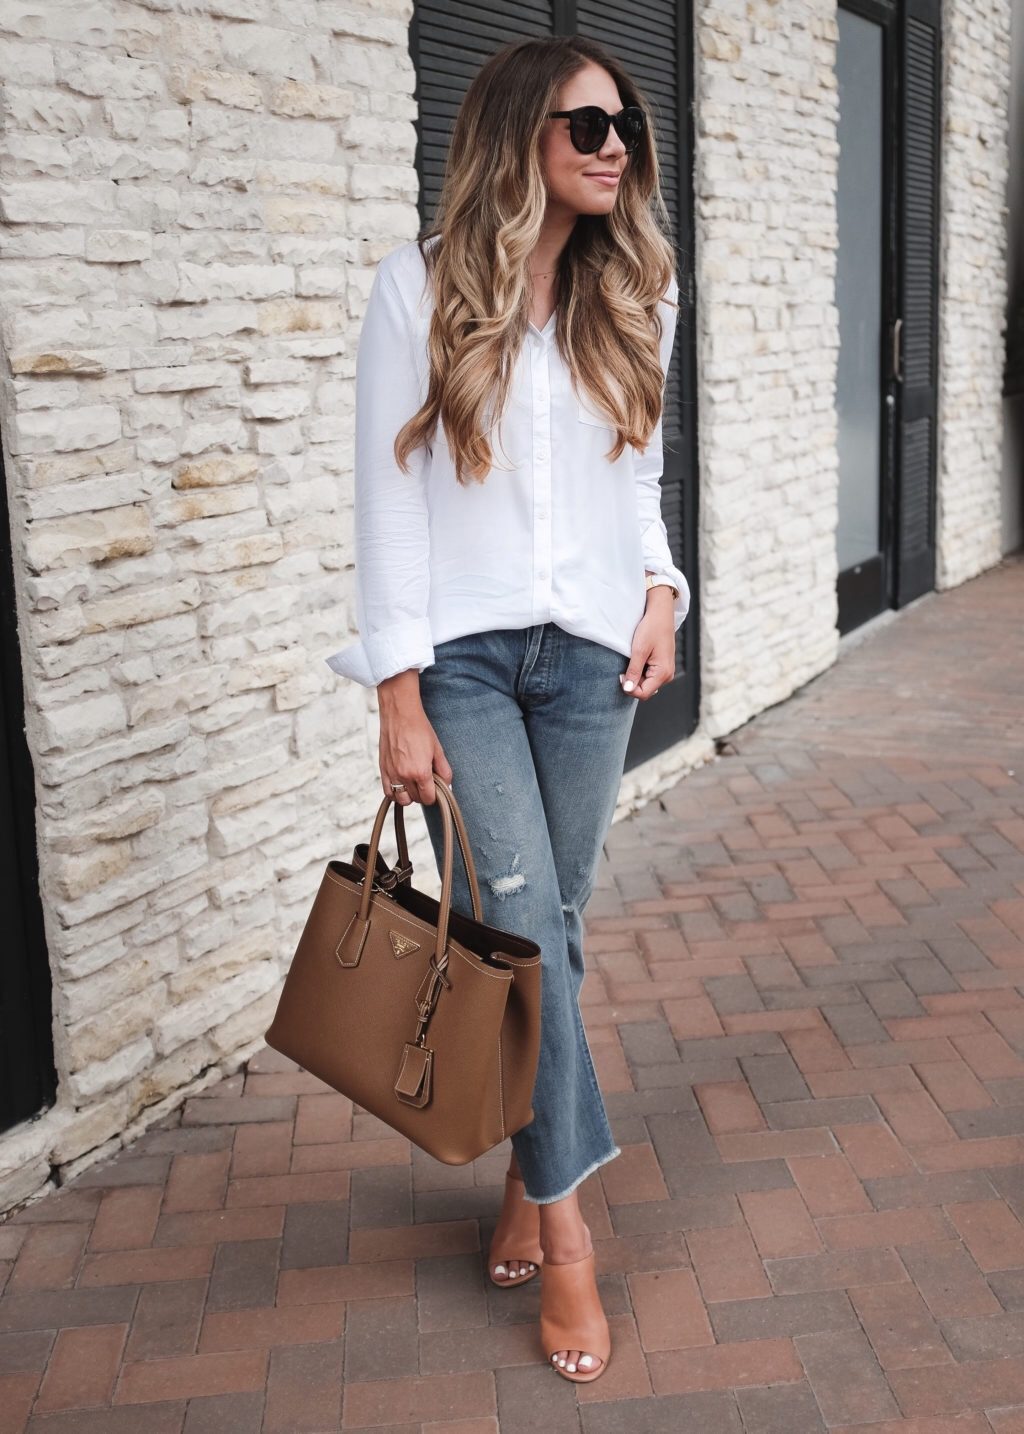 White blouse and cropped denim